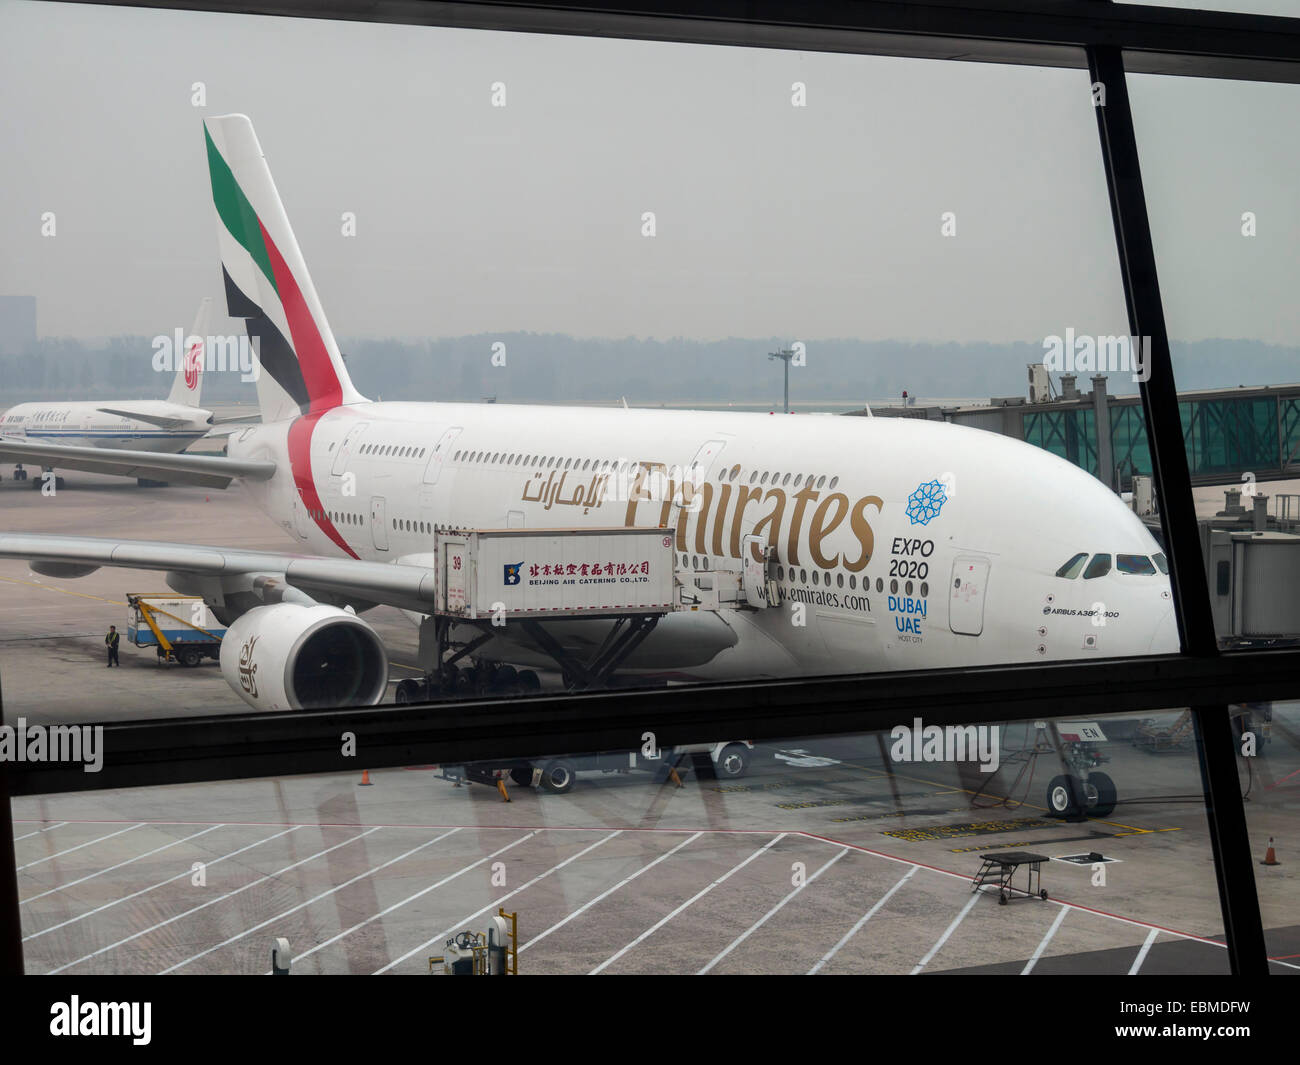 Airbus A380-800 airplane from Emirates airlines Stock Photo